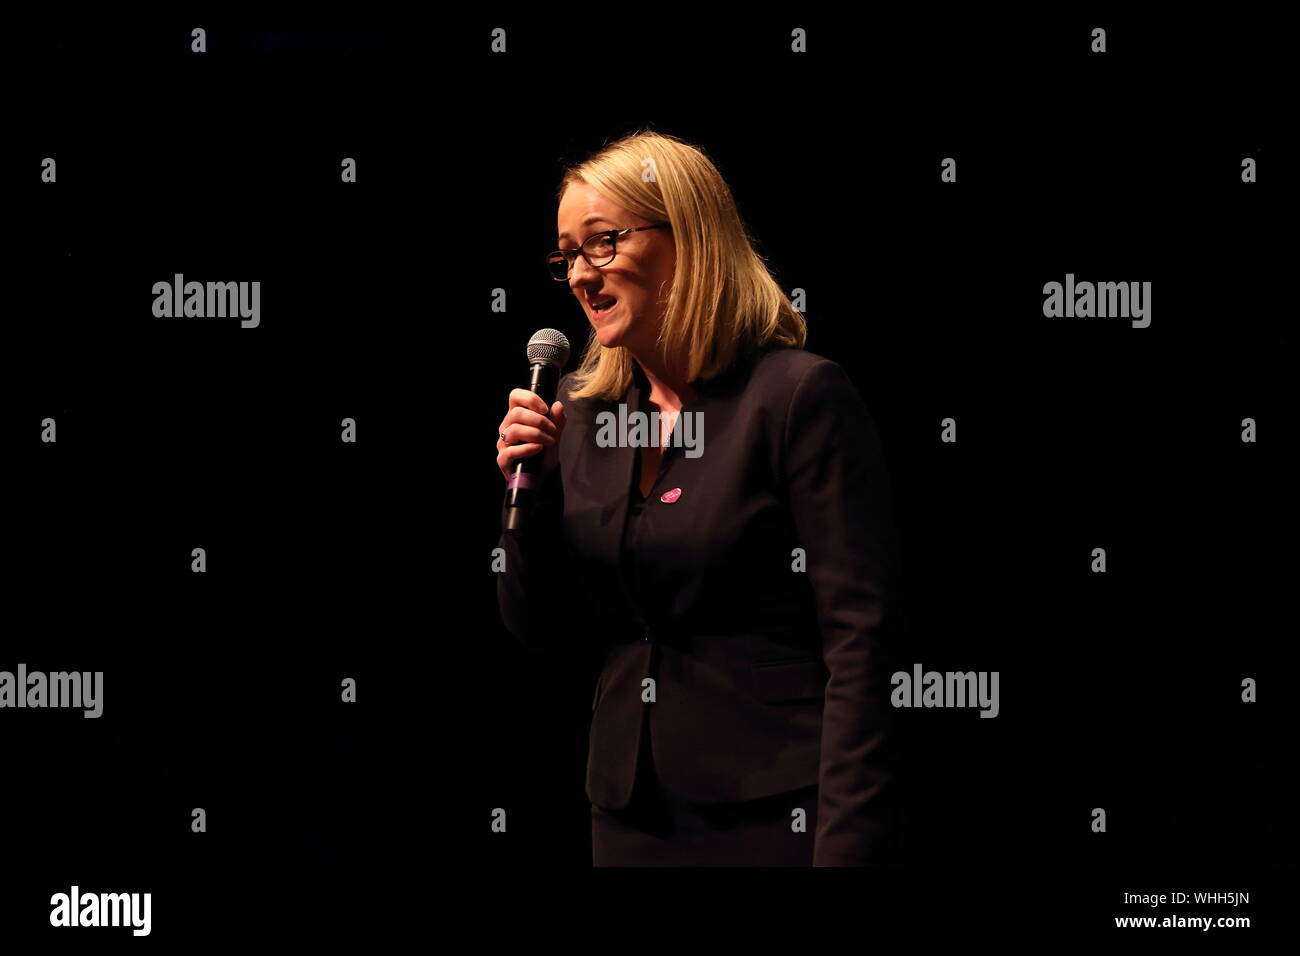 Salford, Greater Manchester, UK. 2nd September, 2019. Salford and Eccles MP Rebecca Long Bailey MP addresses a rally at The Lowry Theatre in Salford. Stock Photo